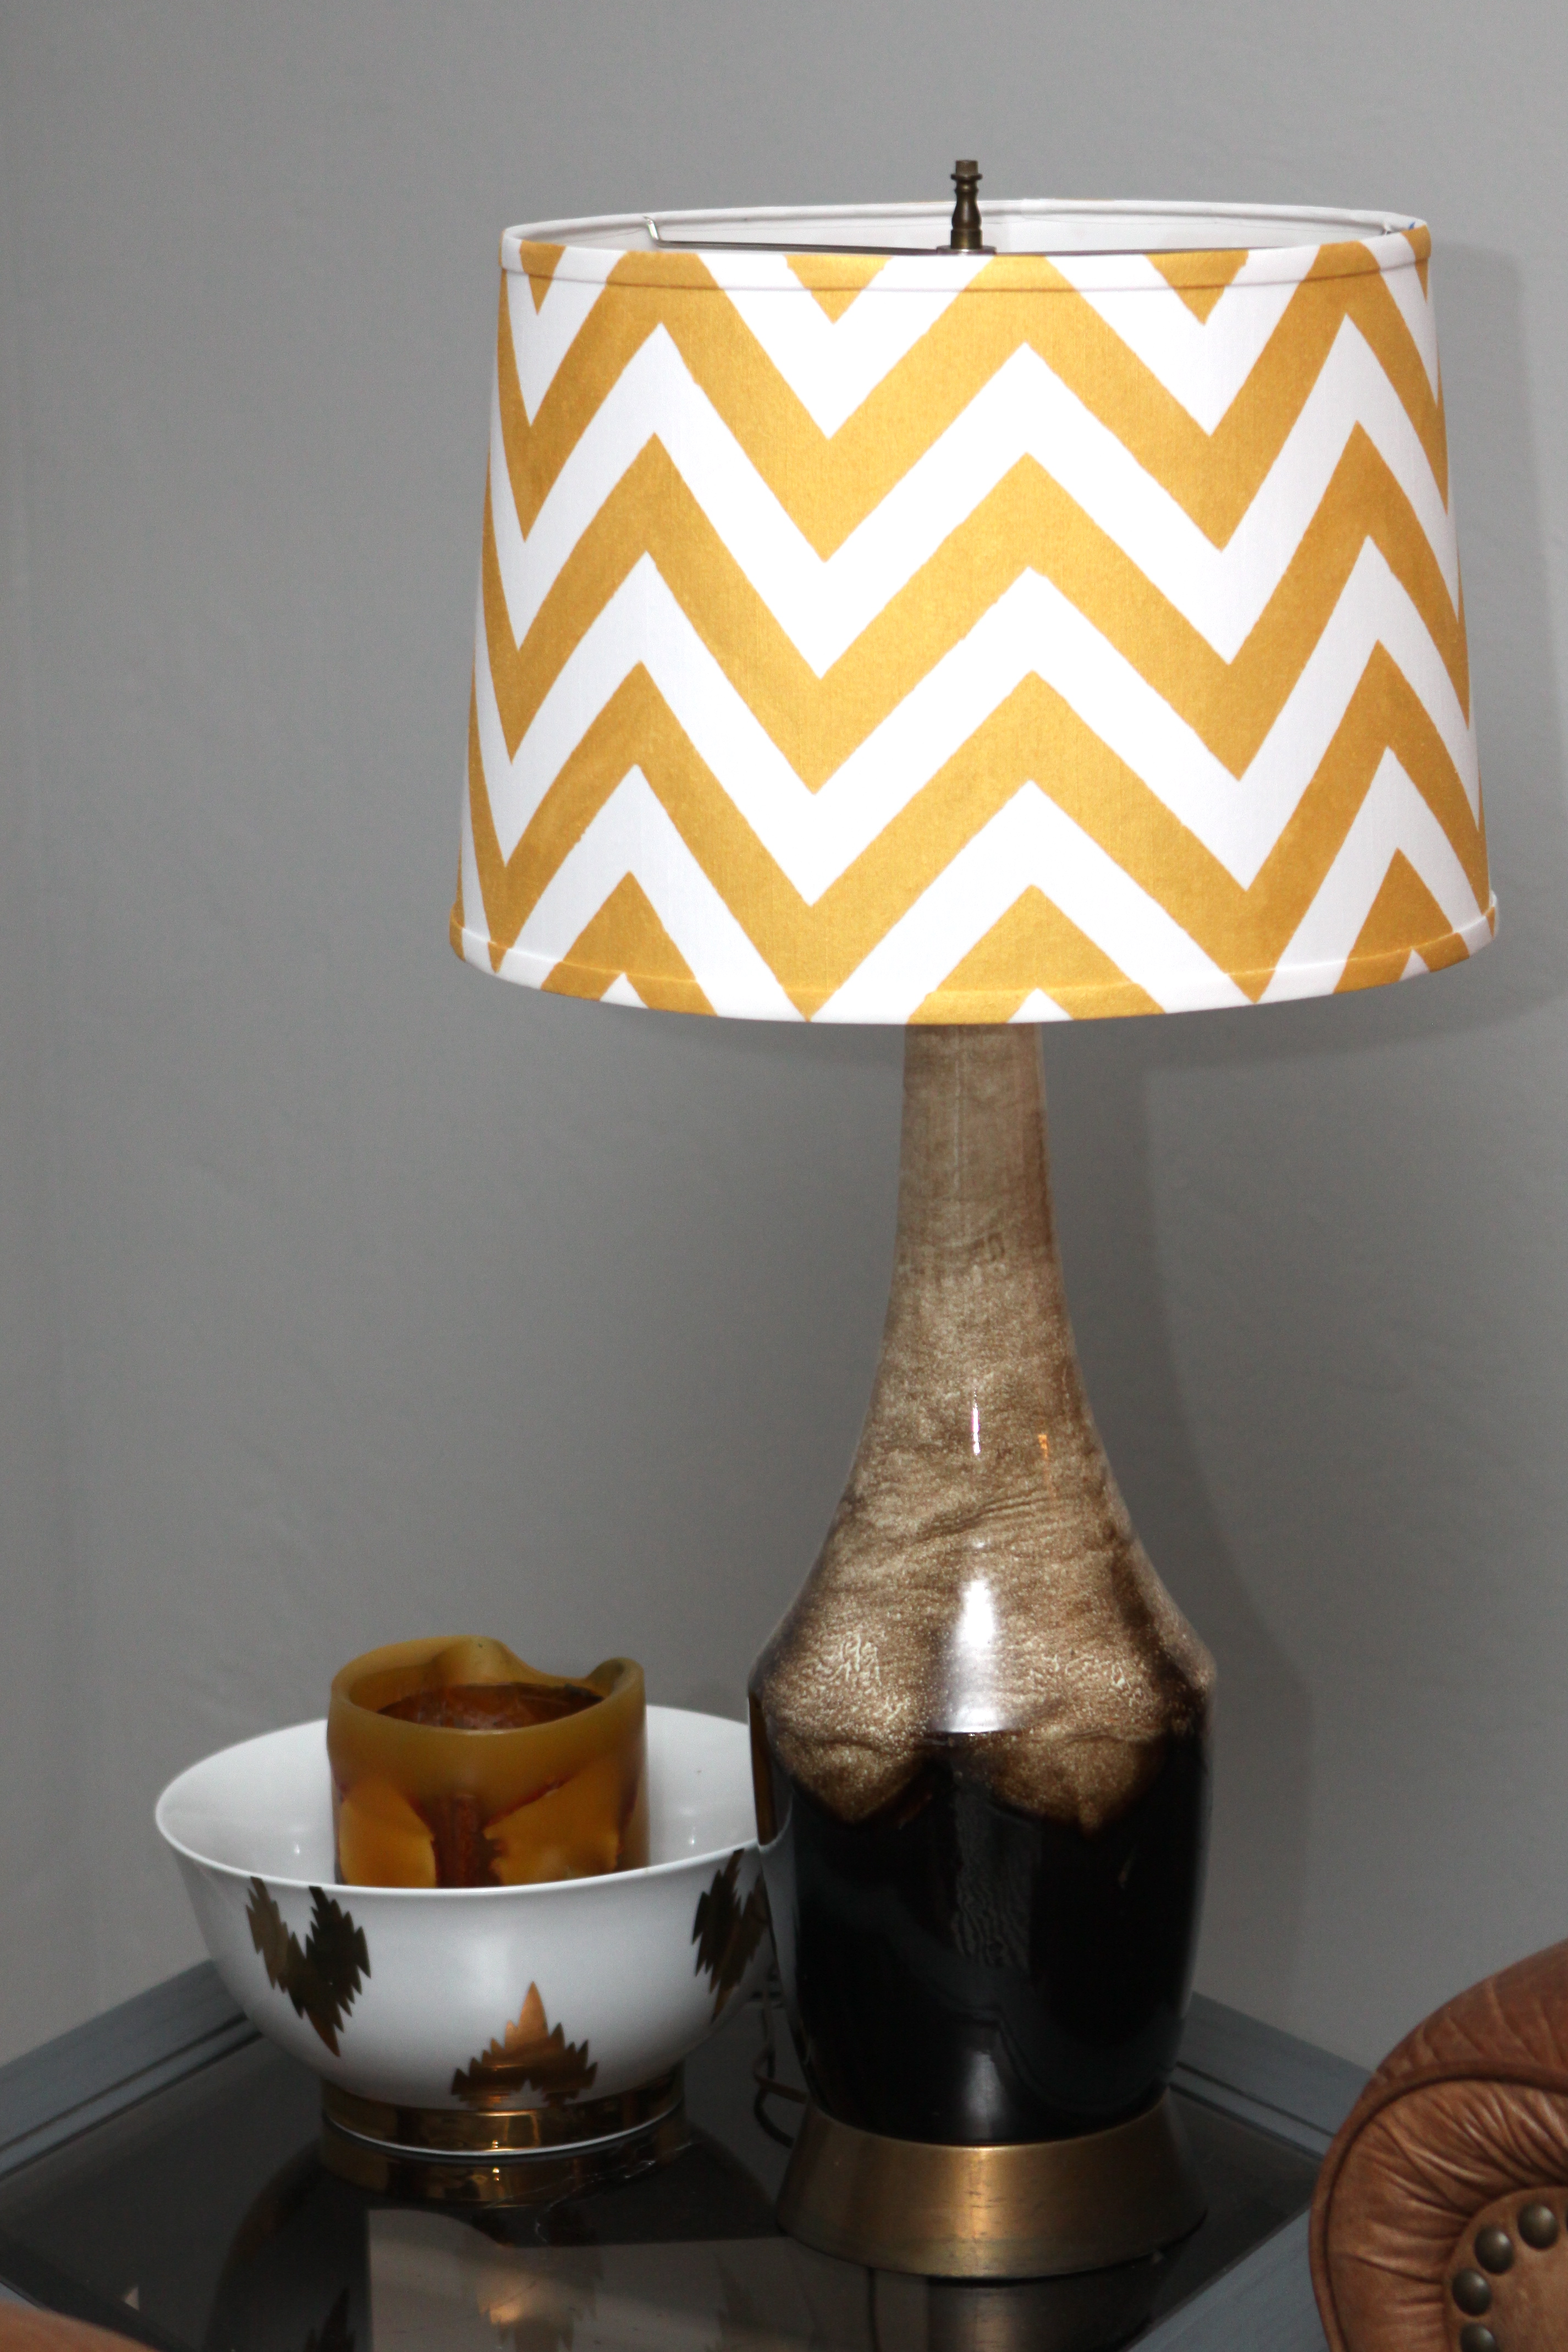 23 Ways To Diy And Redo A Lampshade, Old Wire Lamp Shades